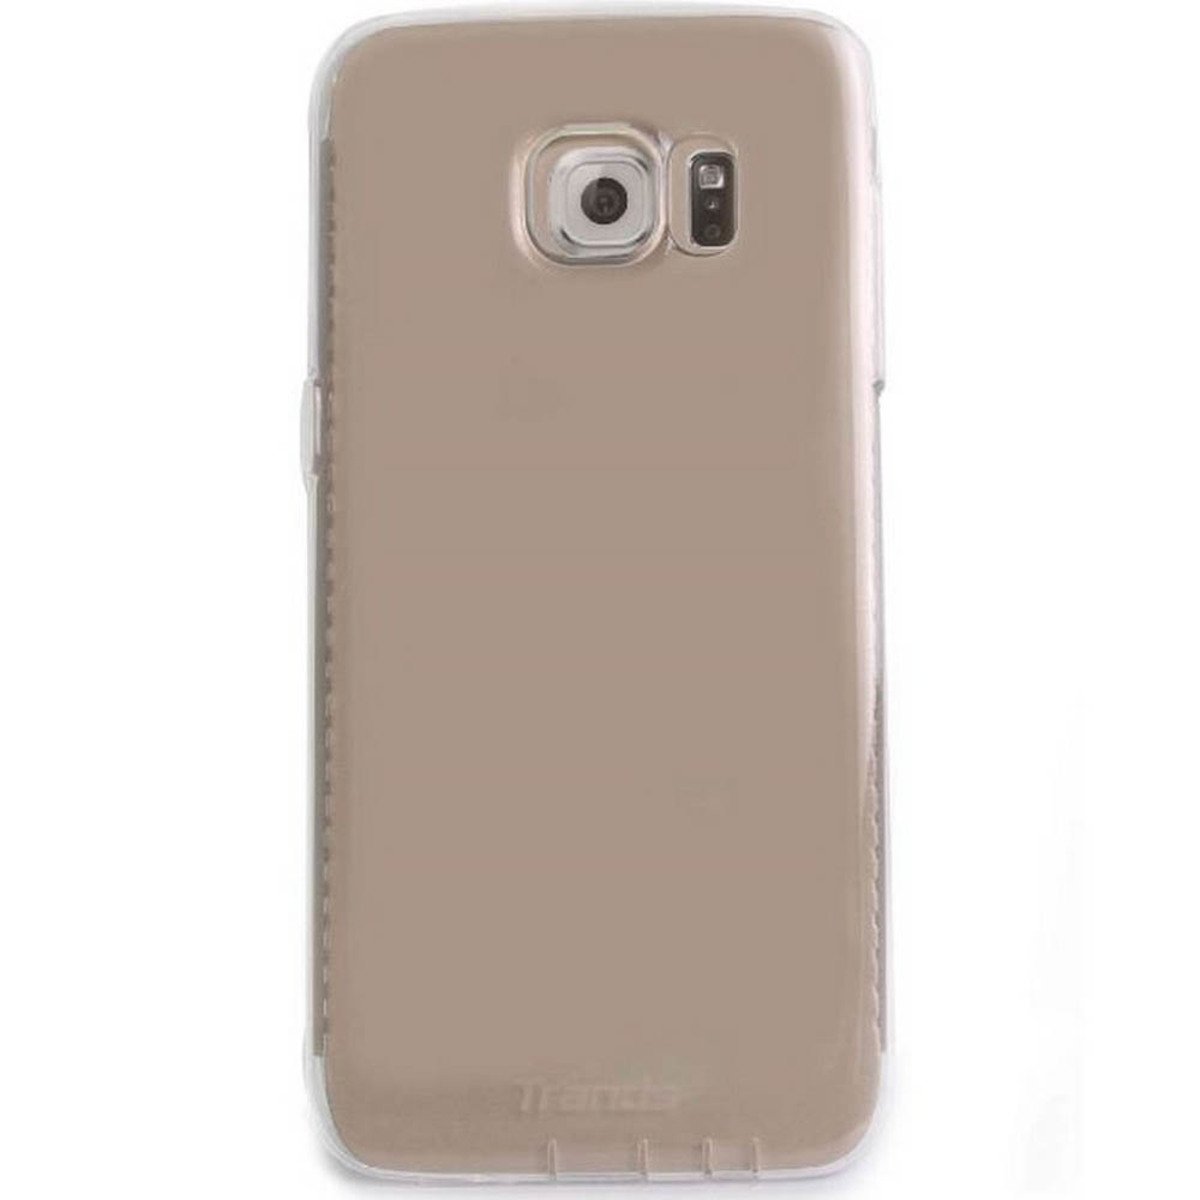 Trands S7 Clear Back Case TR-CC143